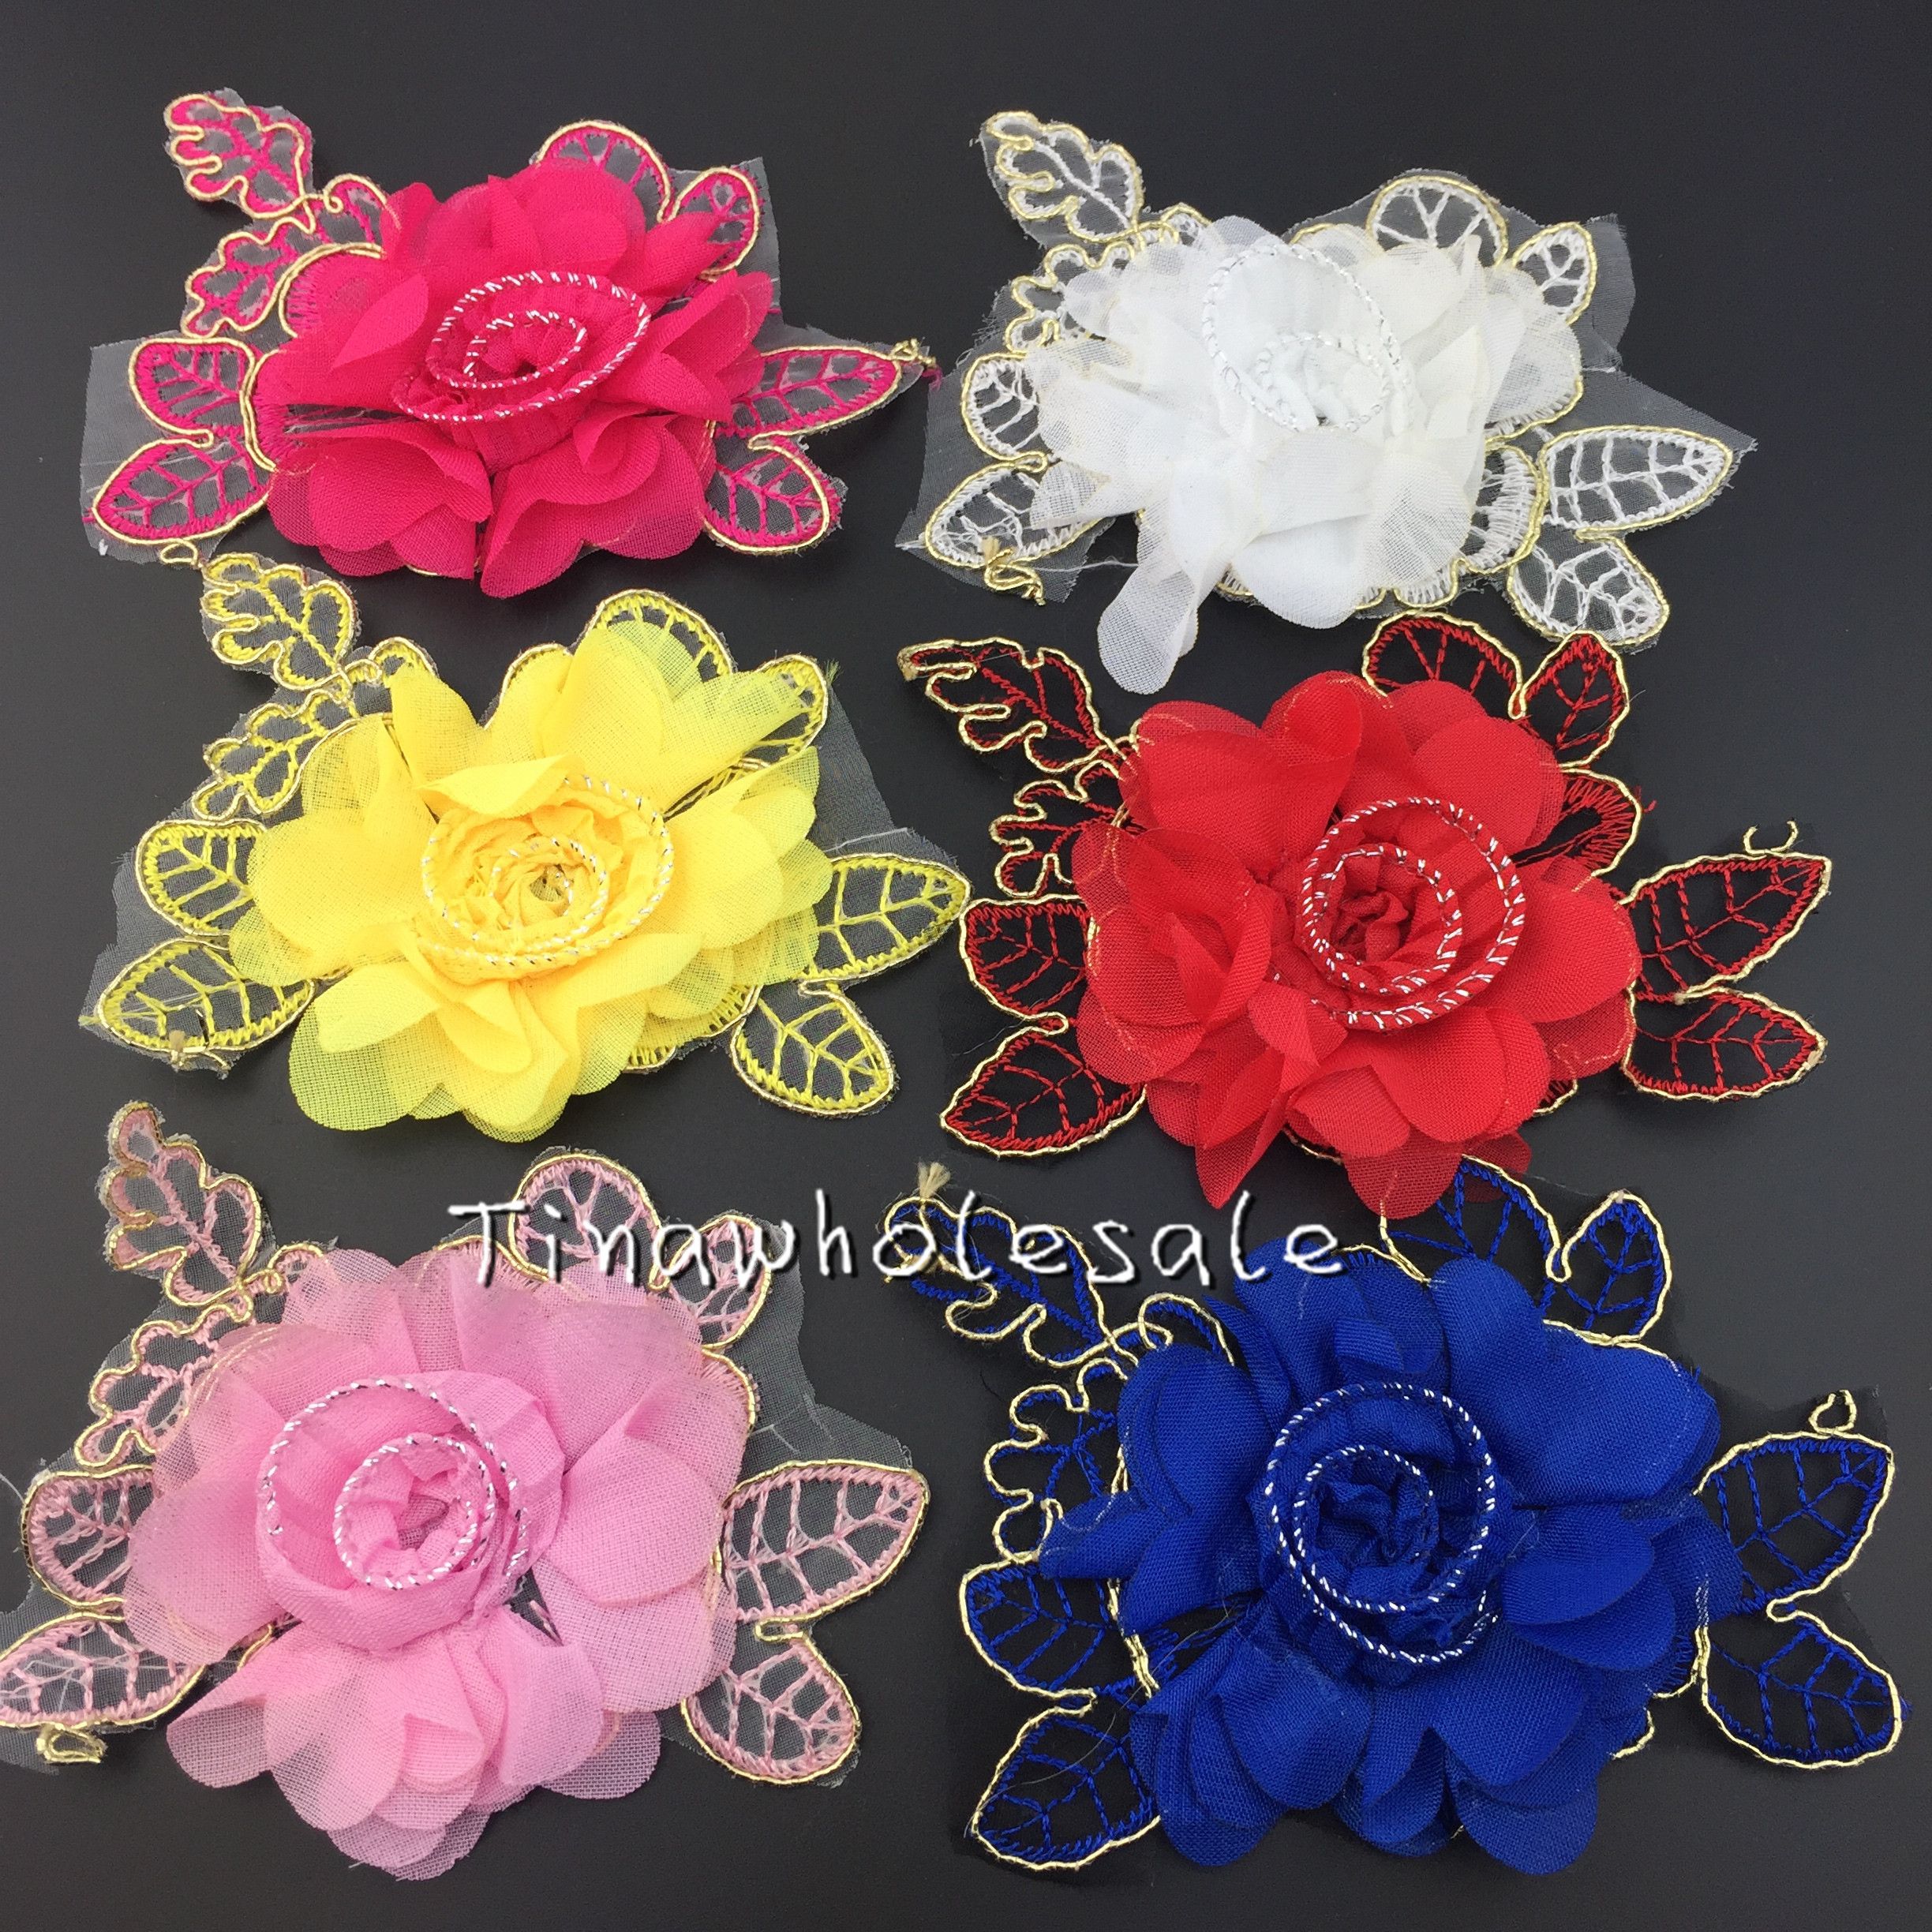 20pcs Hot Diamond Pearl Rhinestone Bow Patch Hair Clip Accessories Clothing Accessories